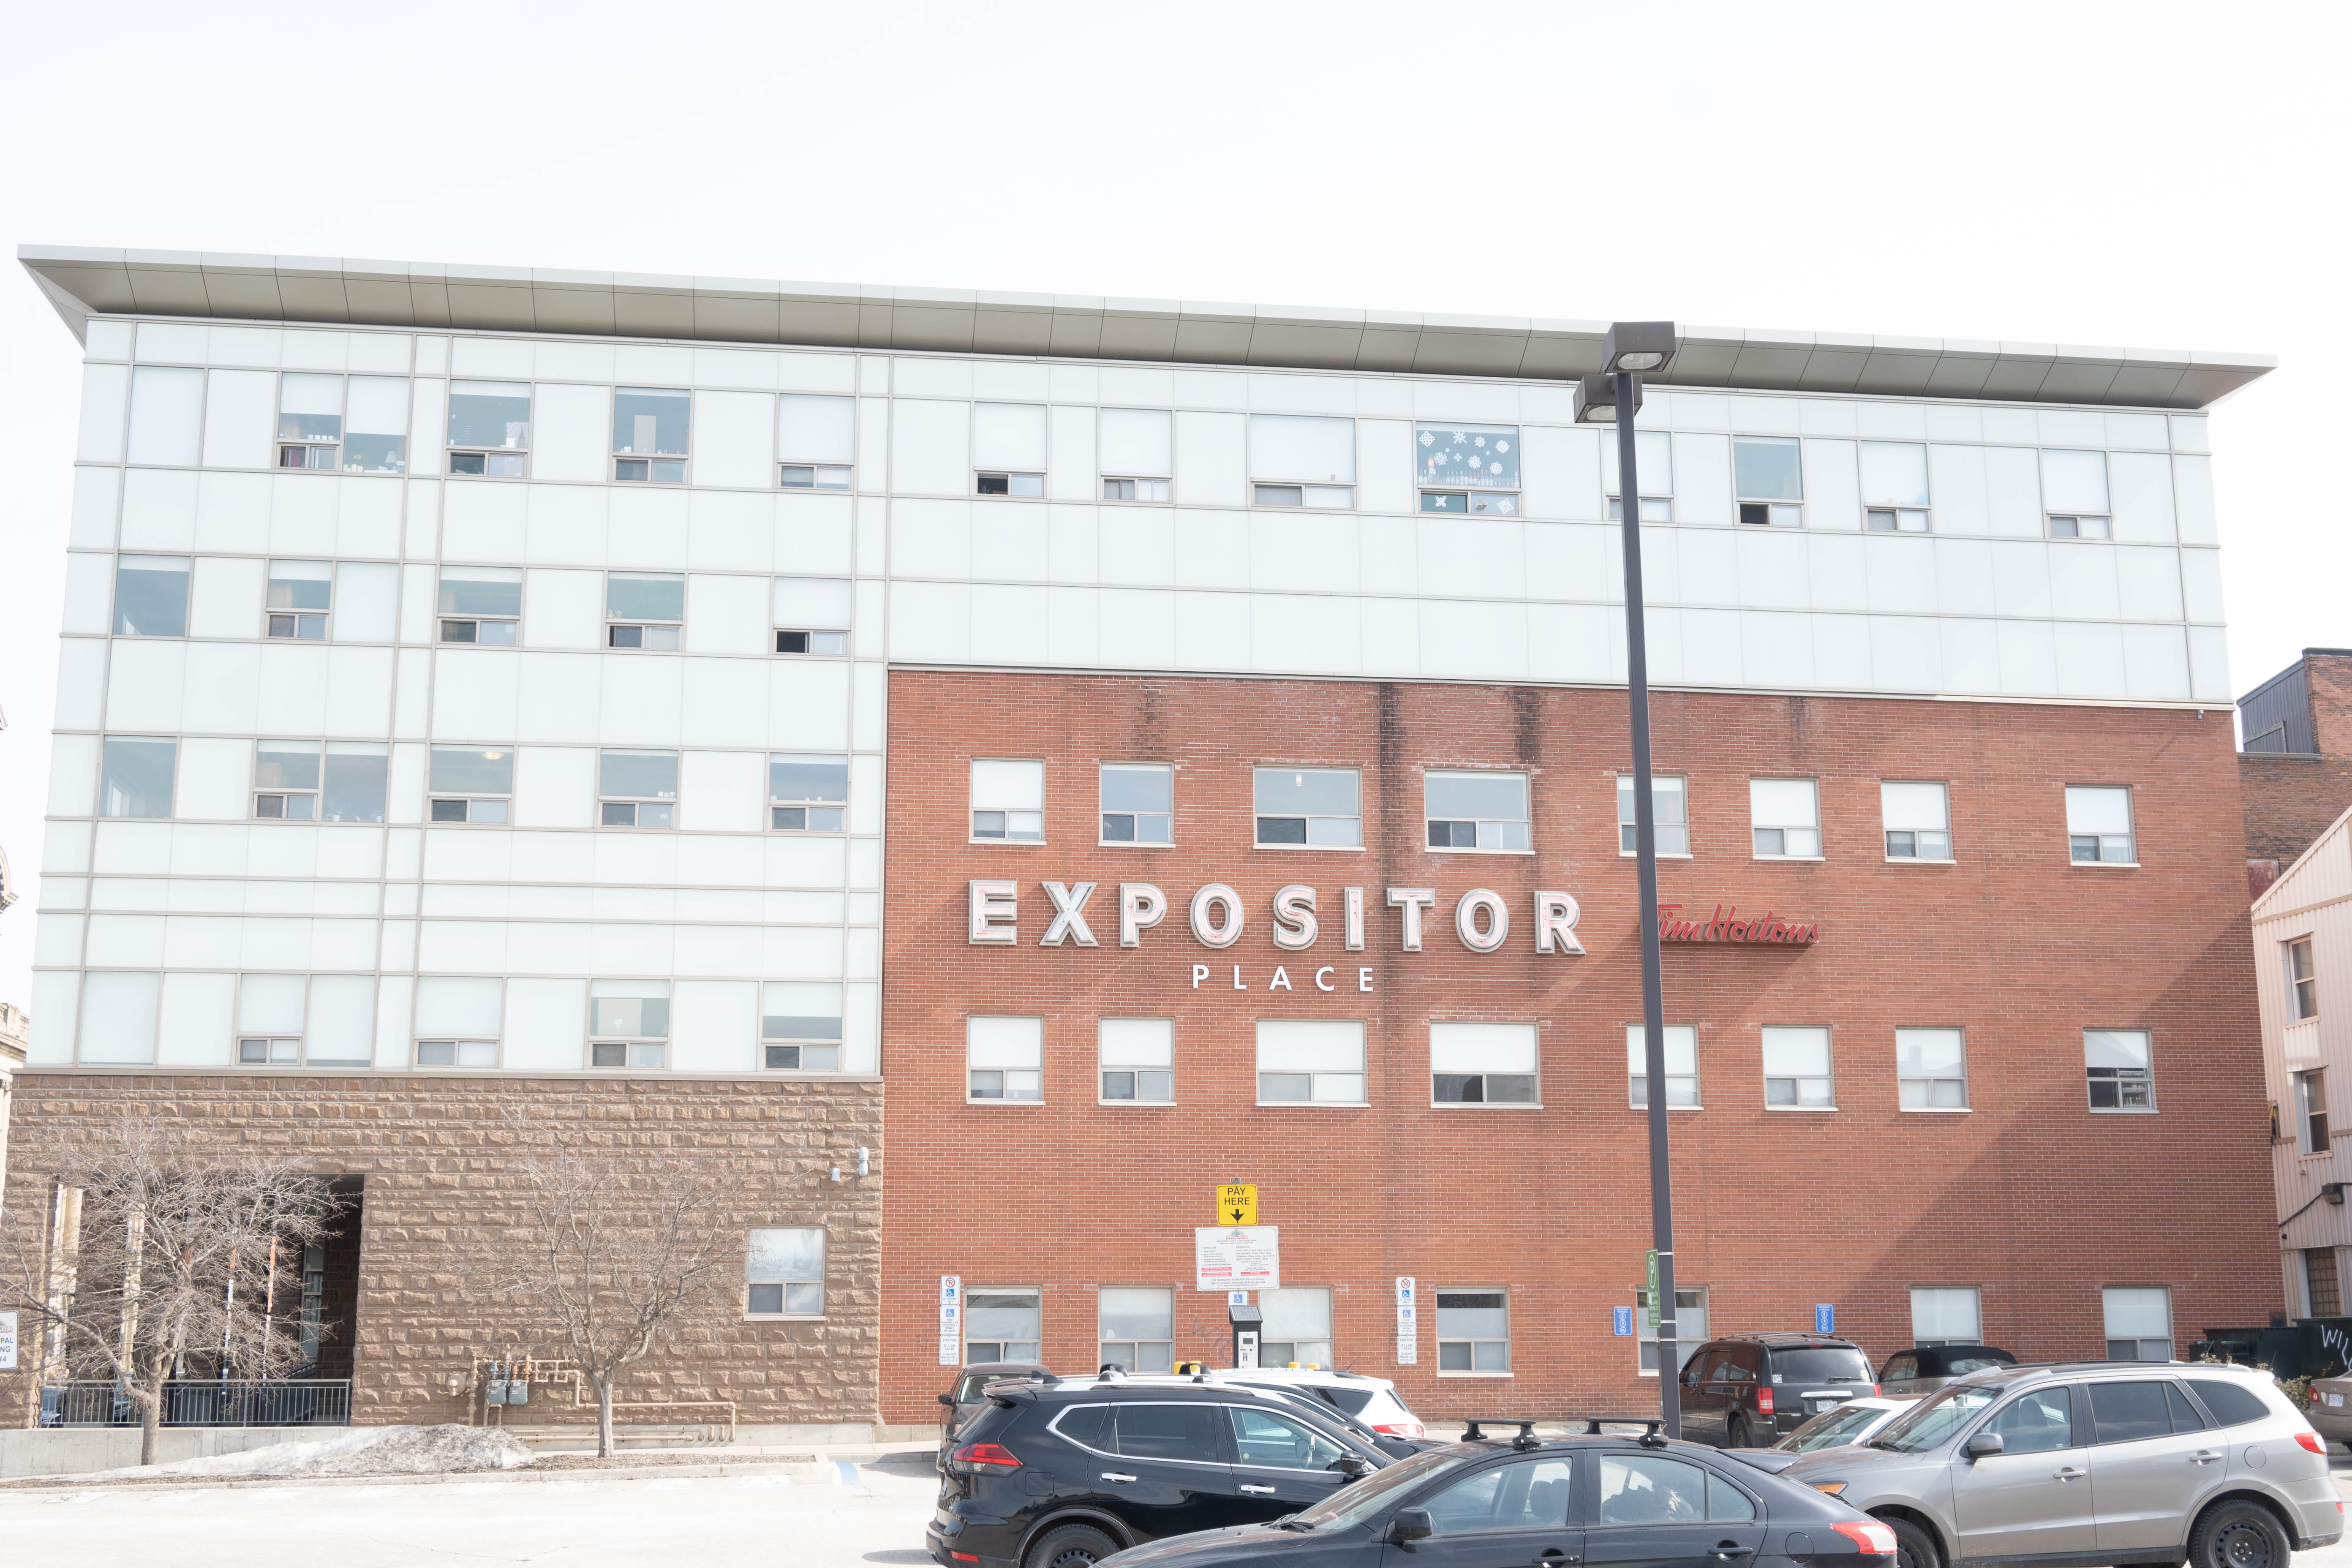 The Expositor Place